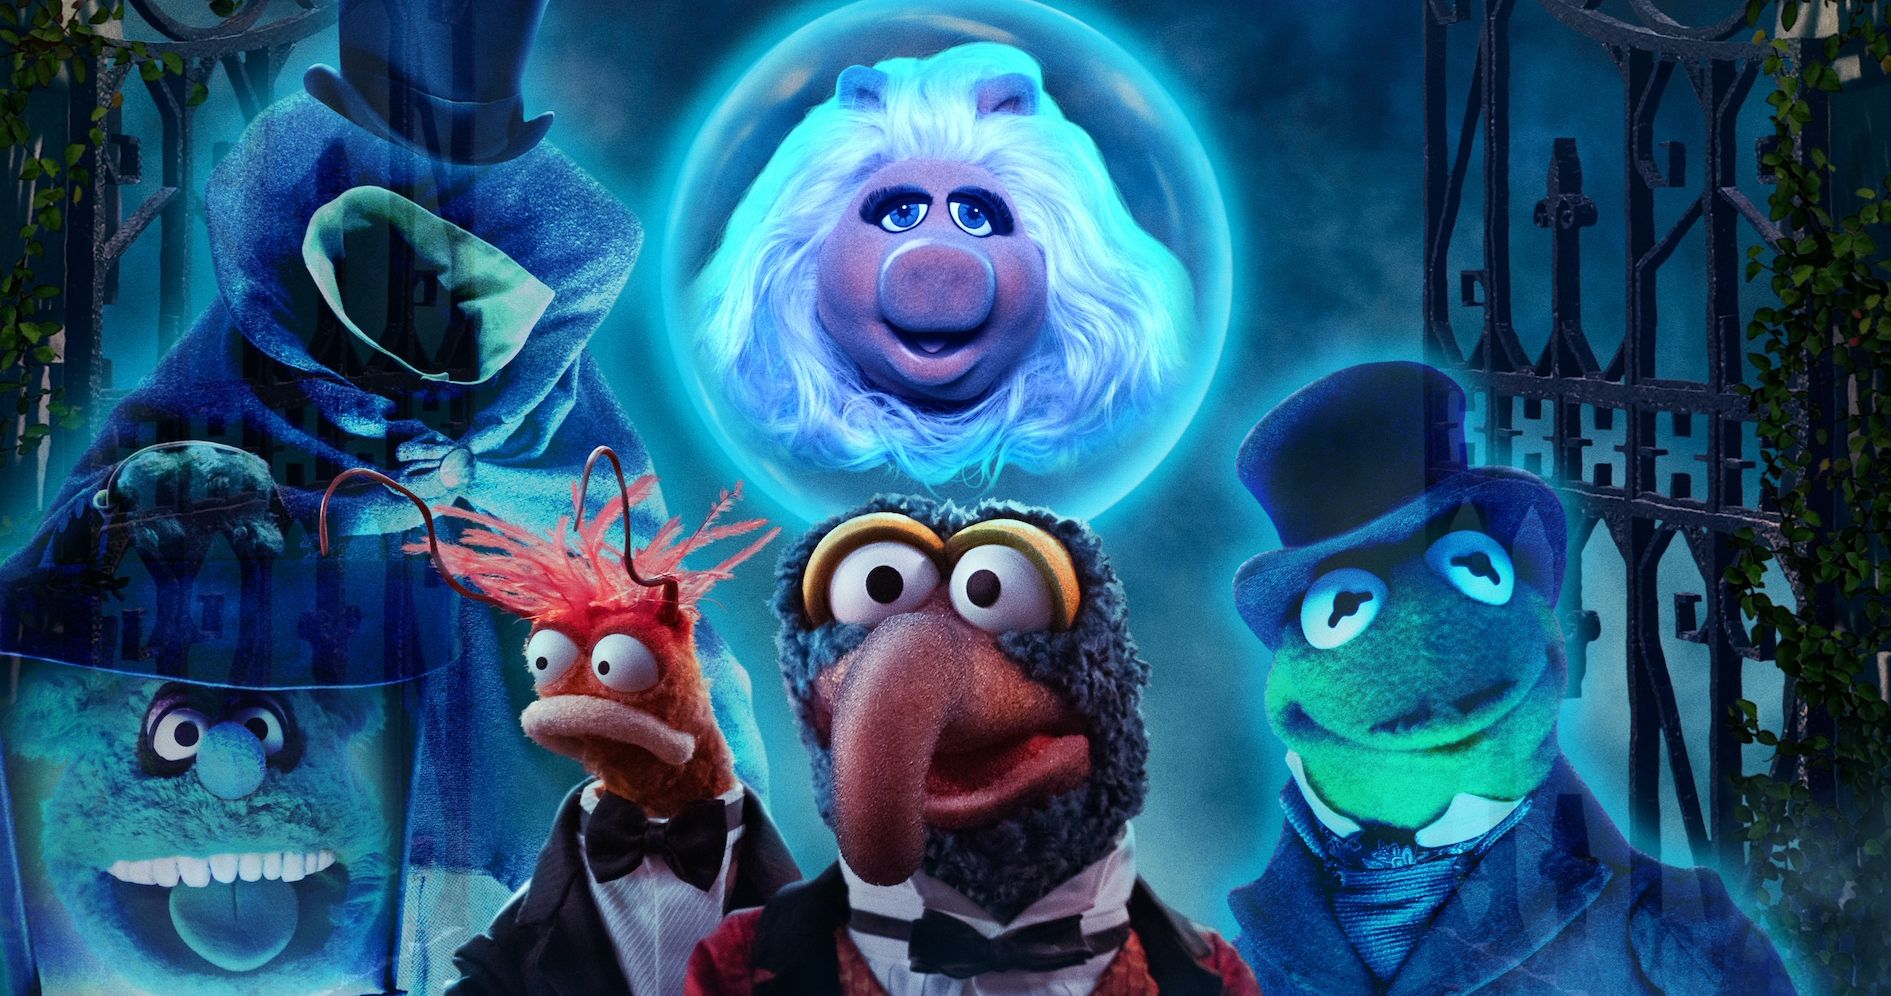 Muppets Haunted Mansion Trailer Brings the Party to Disney+ This Halloween